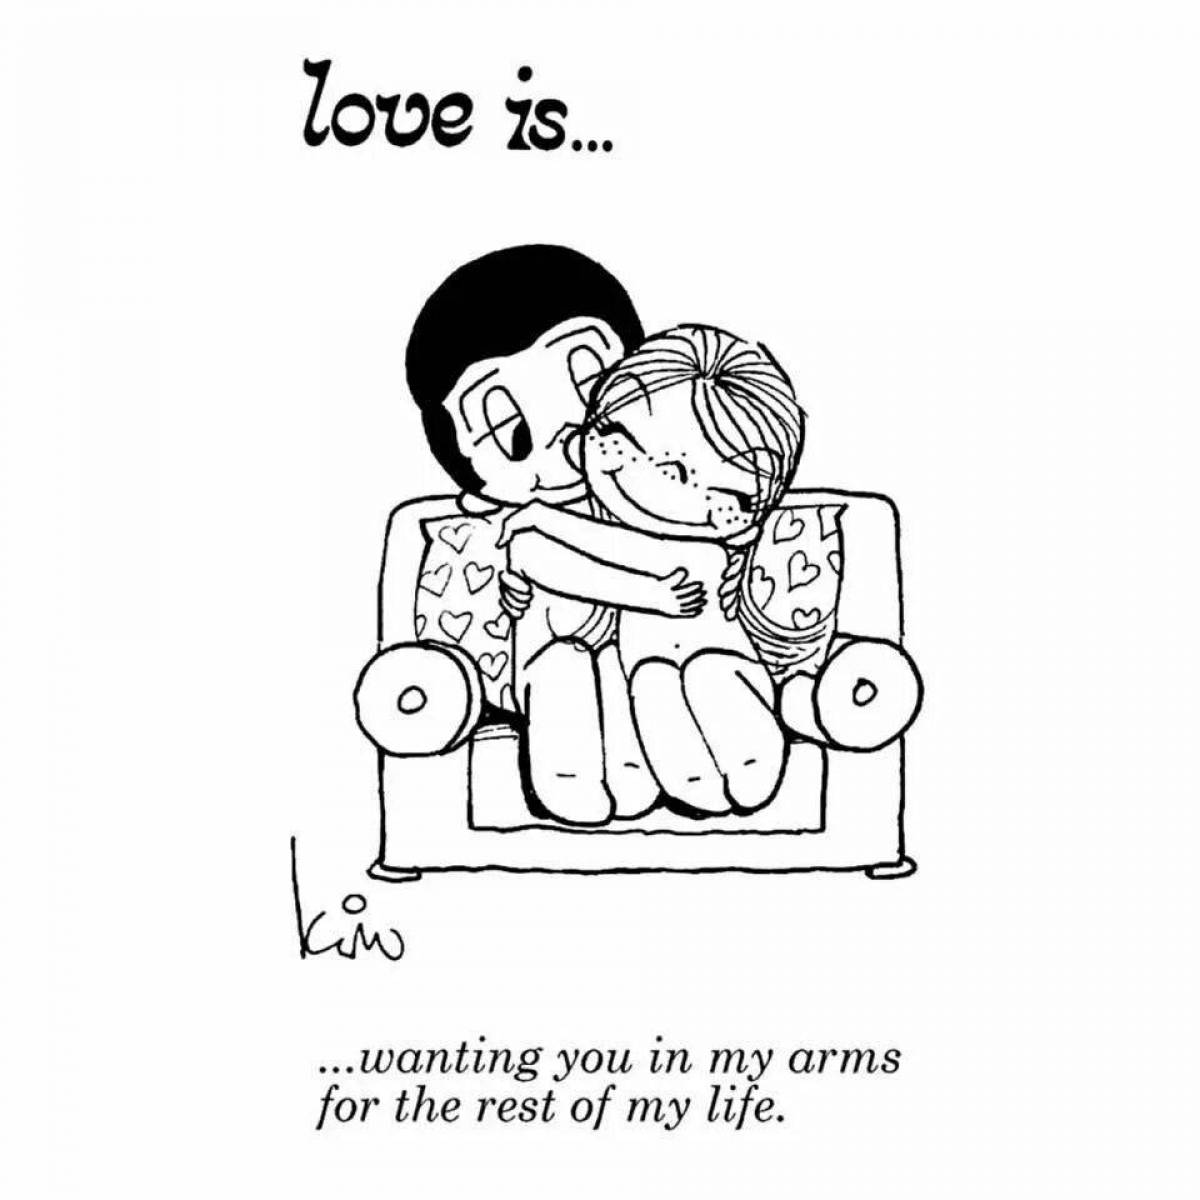 Love is shining coloring book